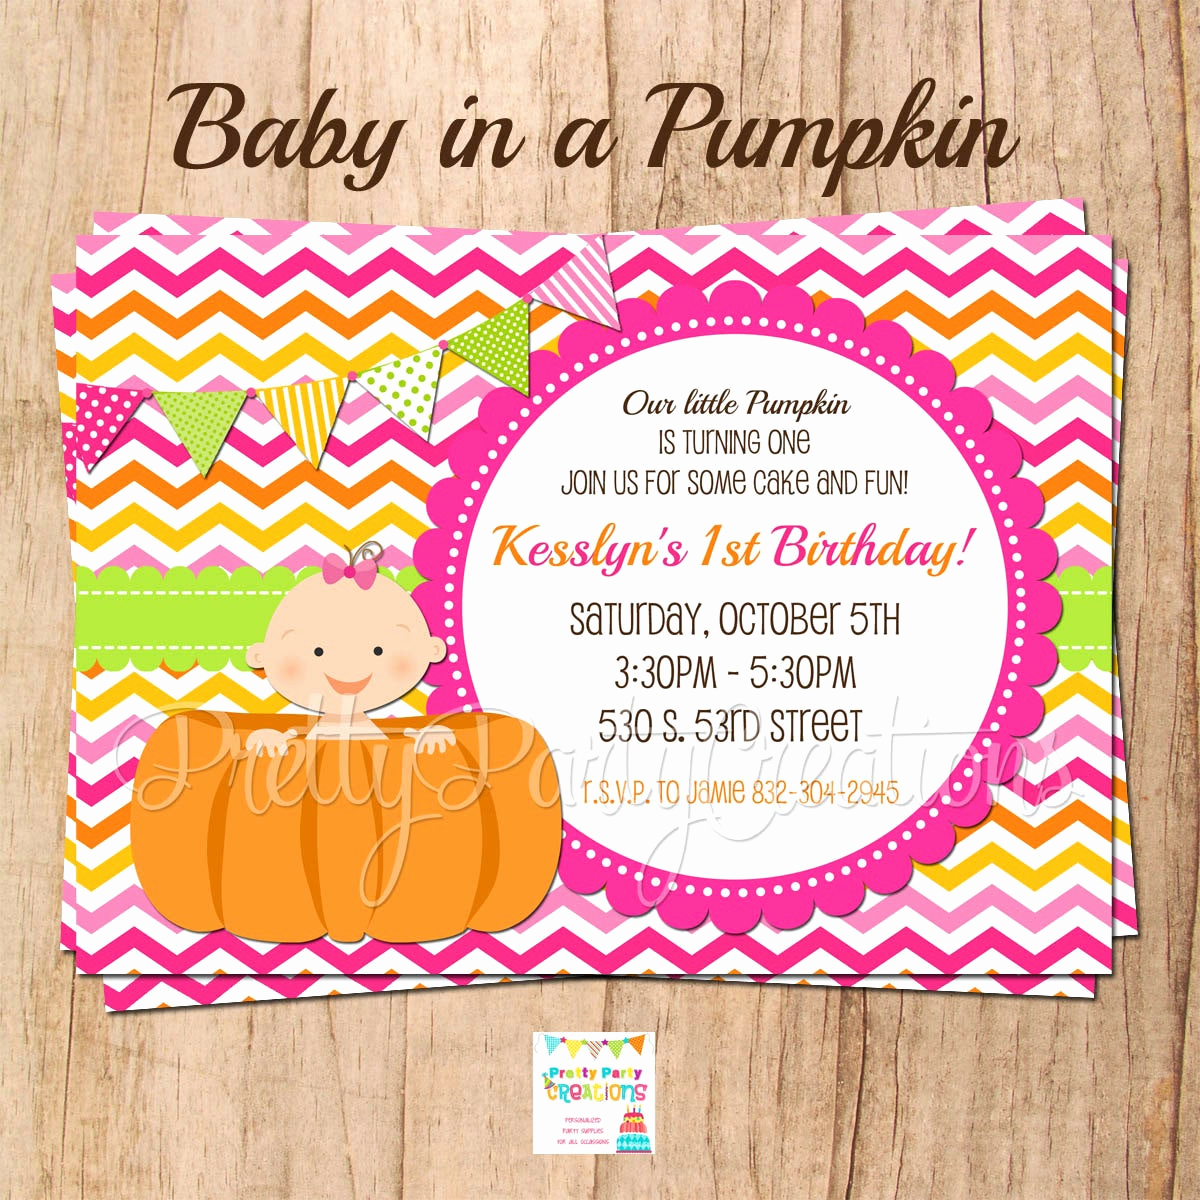 Baby 1st Birthday Invitation Awesome Baby In Pumpkin 1st Birthday or Baby Shower Invitation with